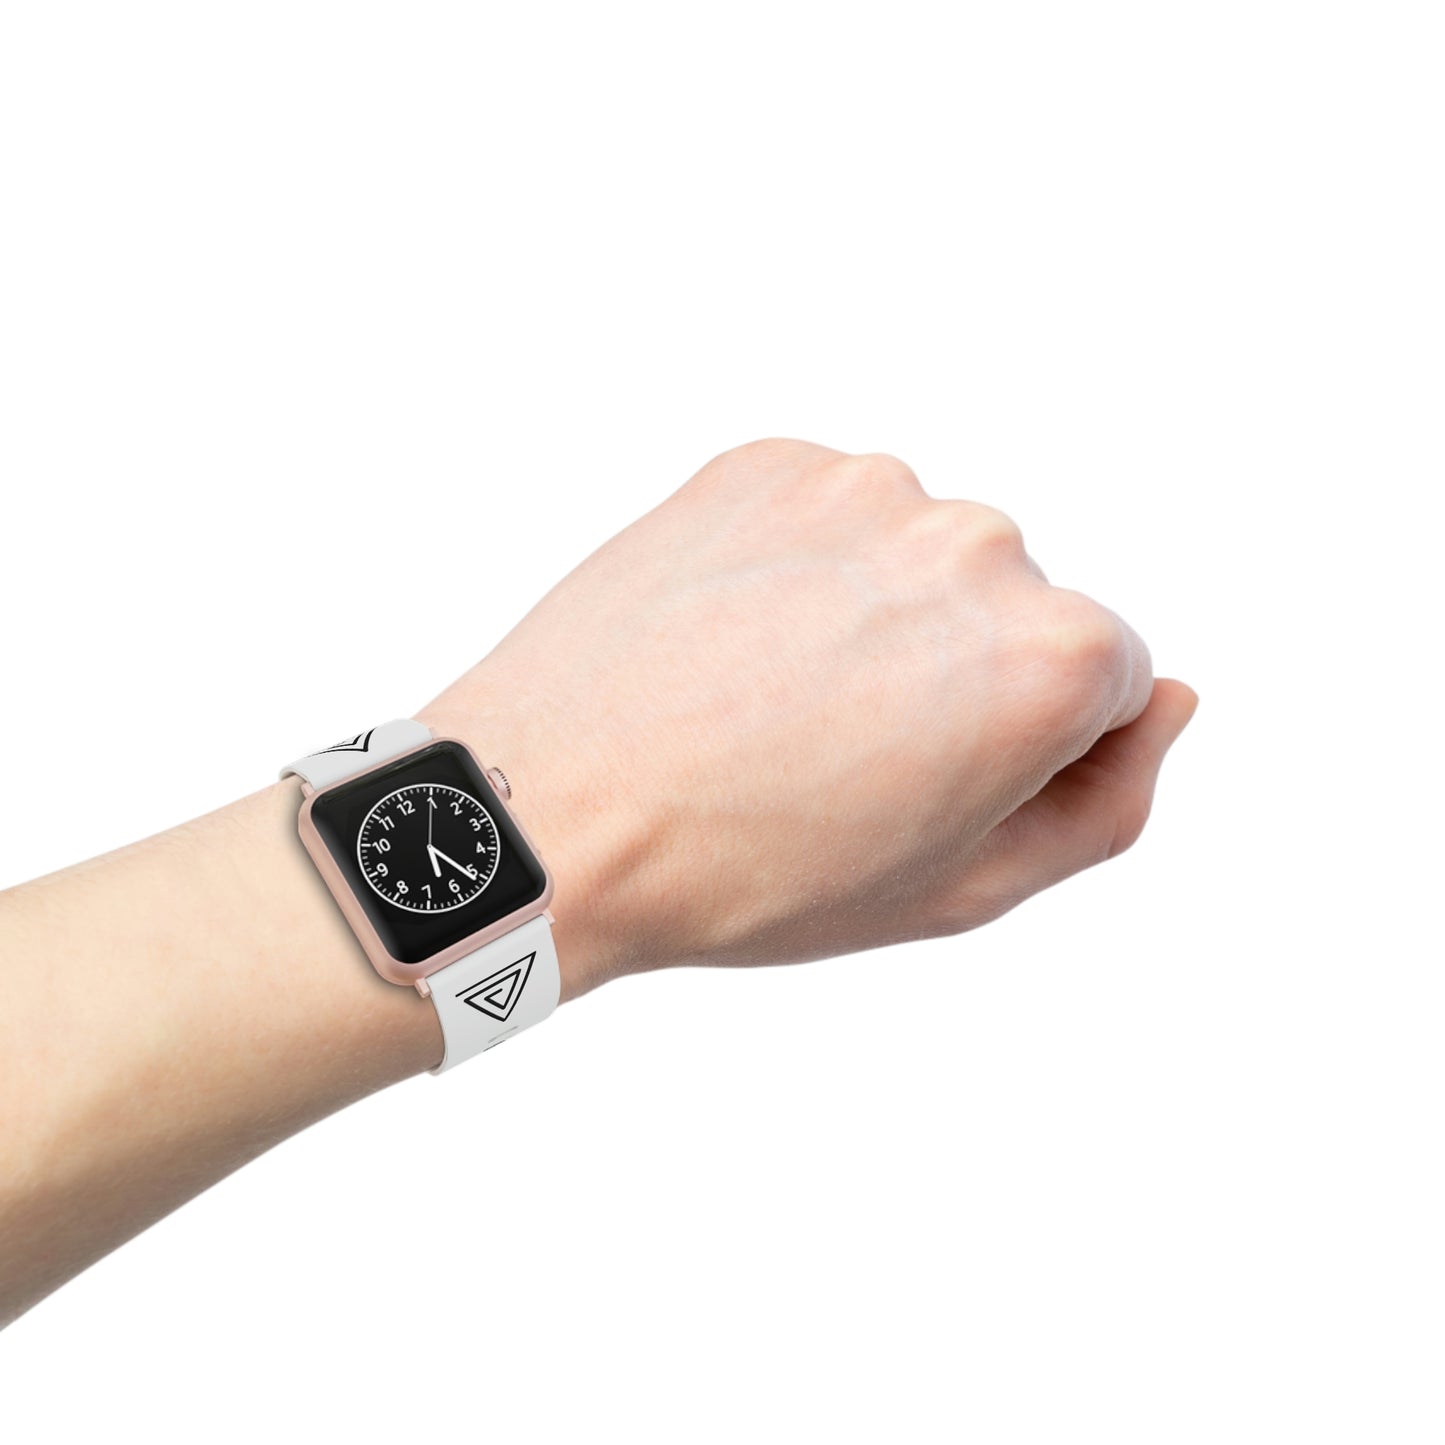 Lattice Labs Watch Band for Apple Watch